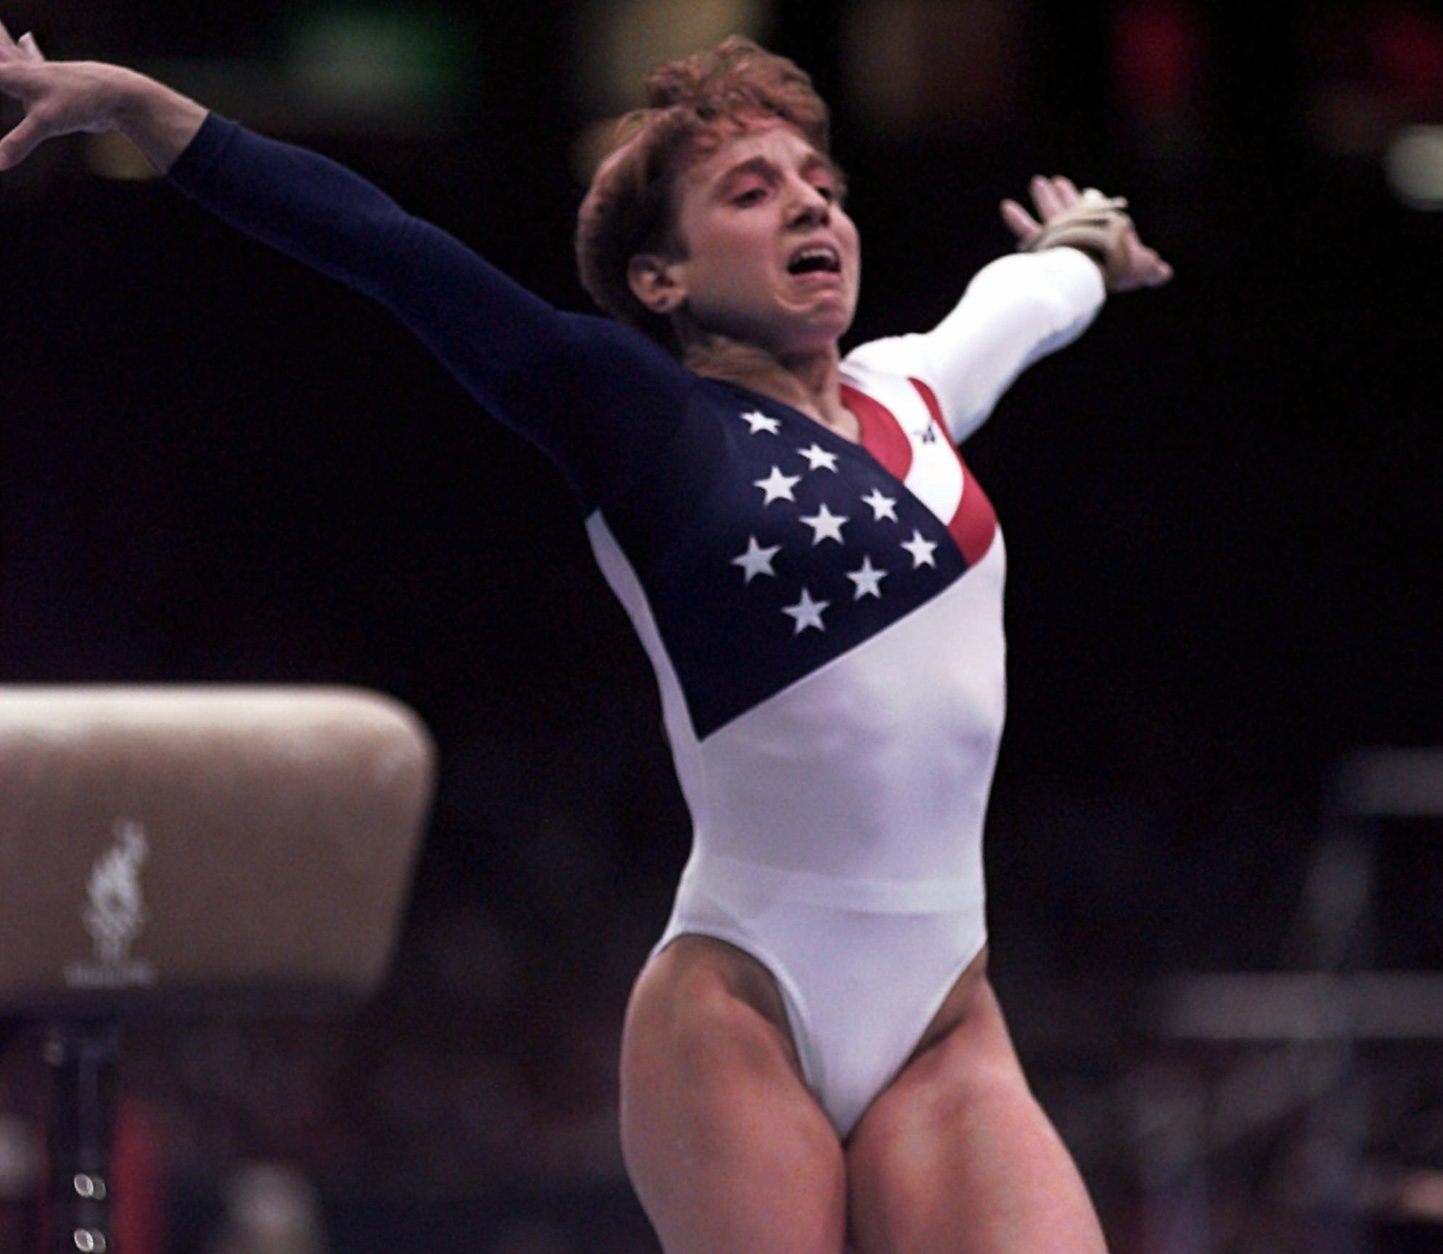 Kerri Strug, of Houston, Texas, reacts after badly landing on her left leg following her vault routine at the women's team gymnastics competition at the Centennial Summer Olympic Games in Atlanta on Tuesday, July 23, 1996.   (AP Photo/John Gaps III)